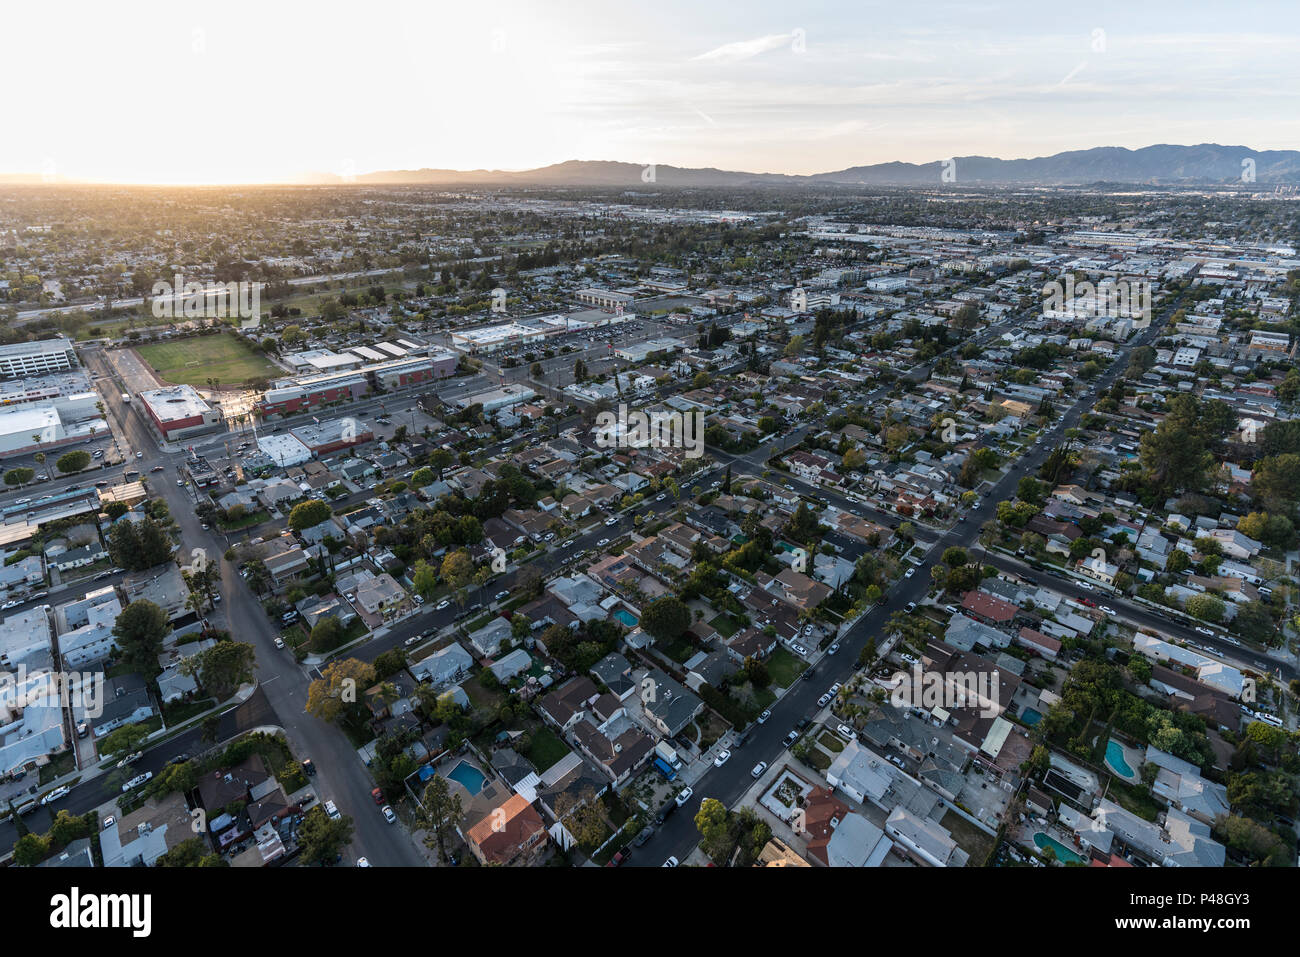 North Hollywood, California, USA - April 18, 2018:  Sunset aerial view towards Laurel Canyon Bl in the San Fernando Valley area of Los Angeles. Stock Photo